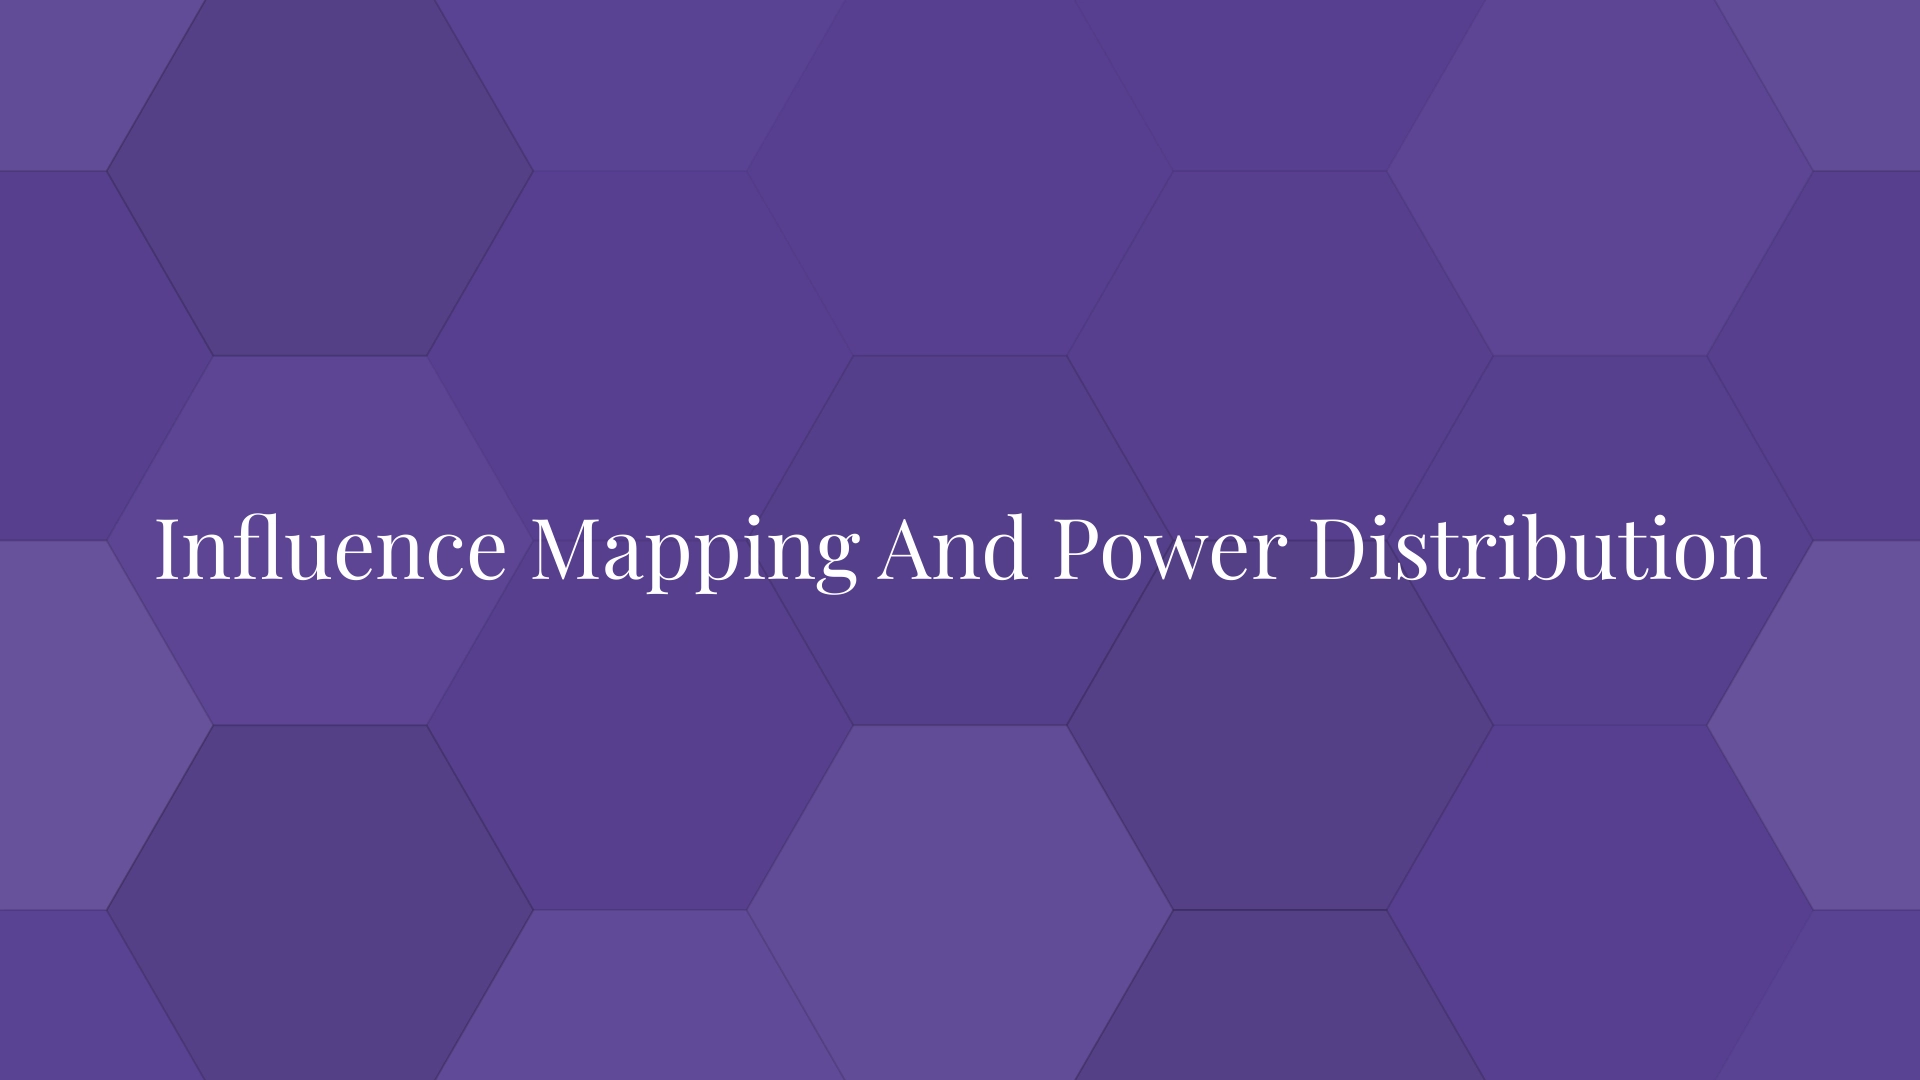 Influence Mapping And Power Distribution